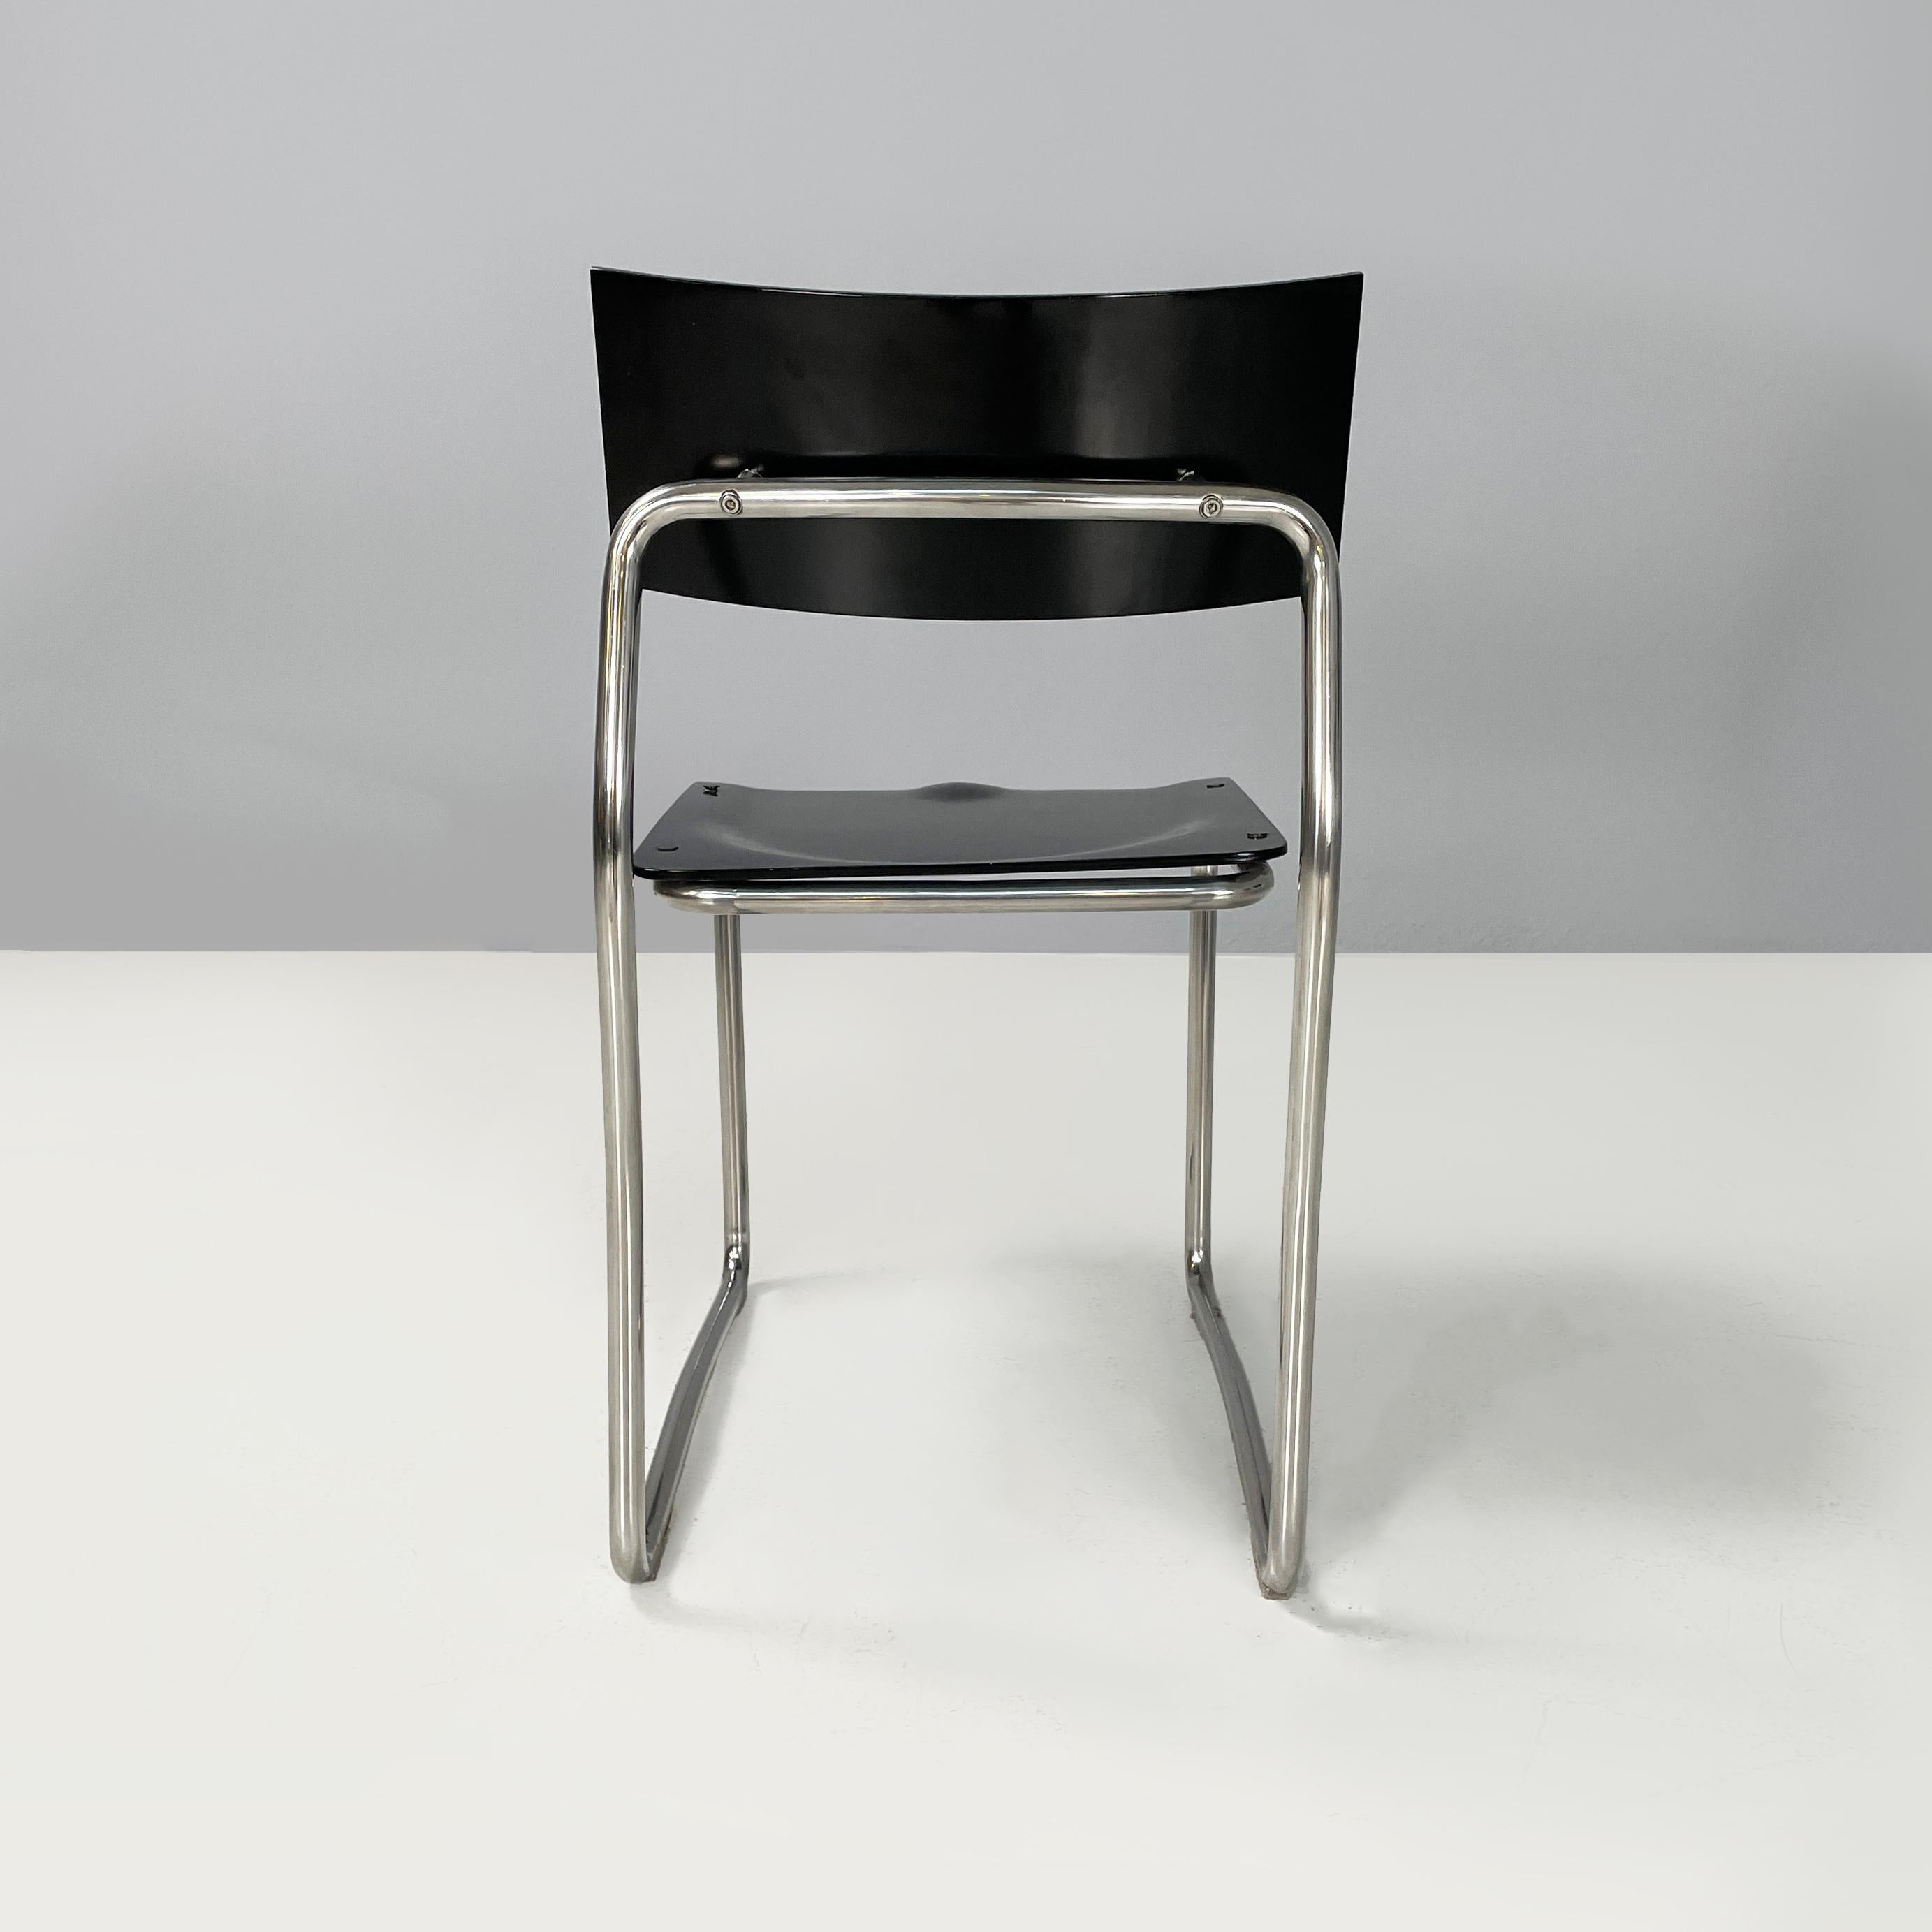 Late 20th Century Italian modern Black wood and metal Chairs Lariana by Terragni for Zanotta, 1980 For Sale